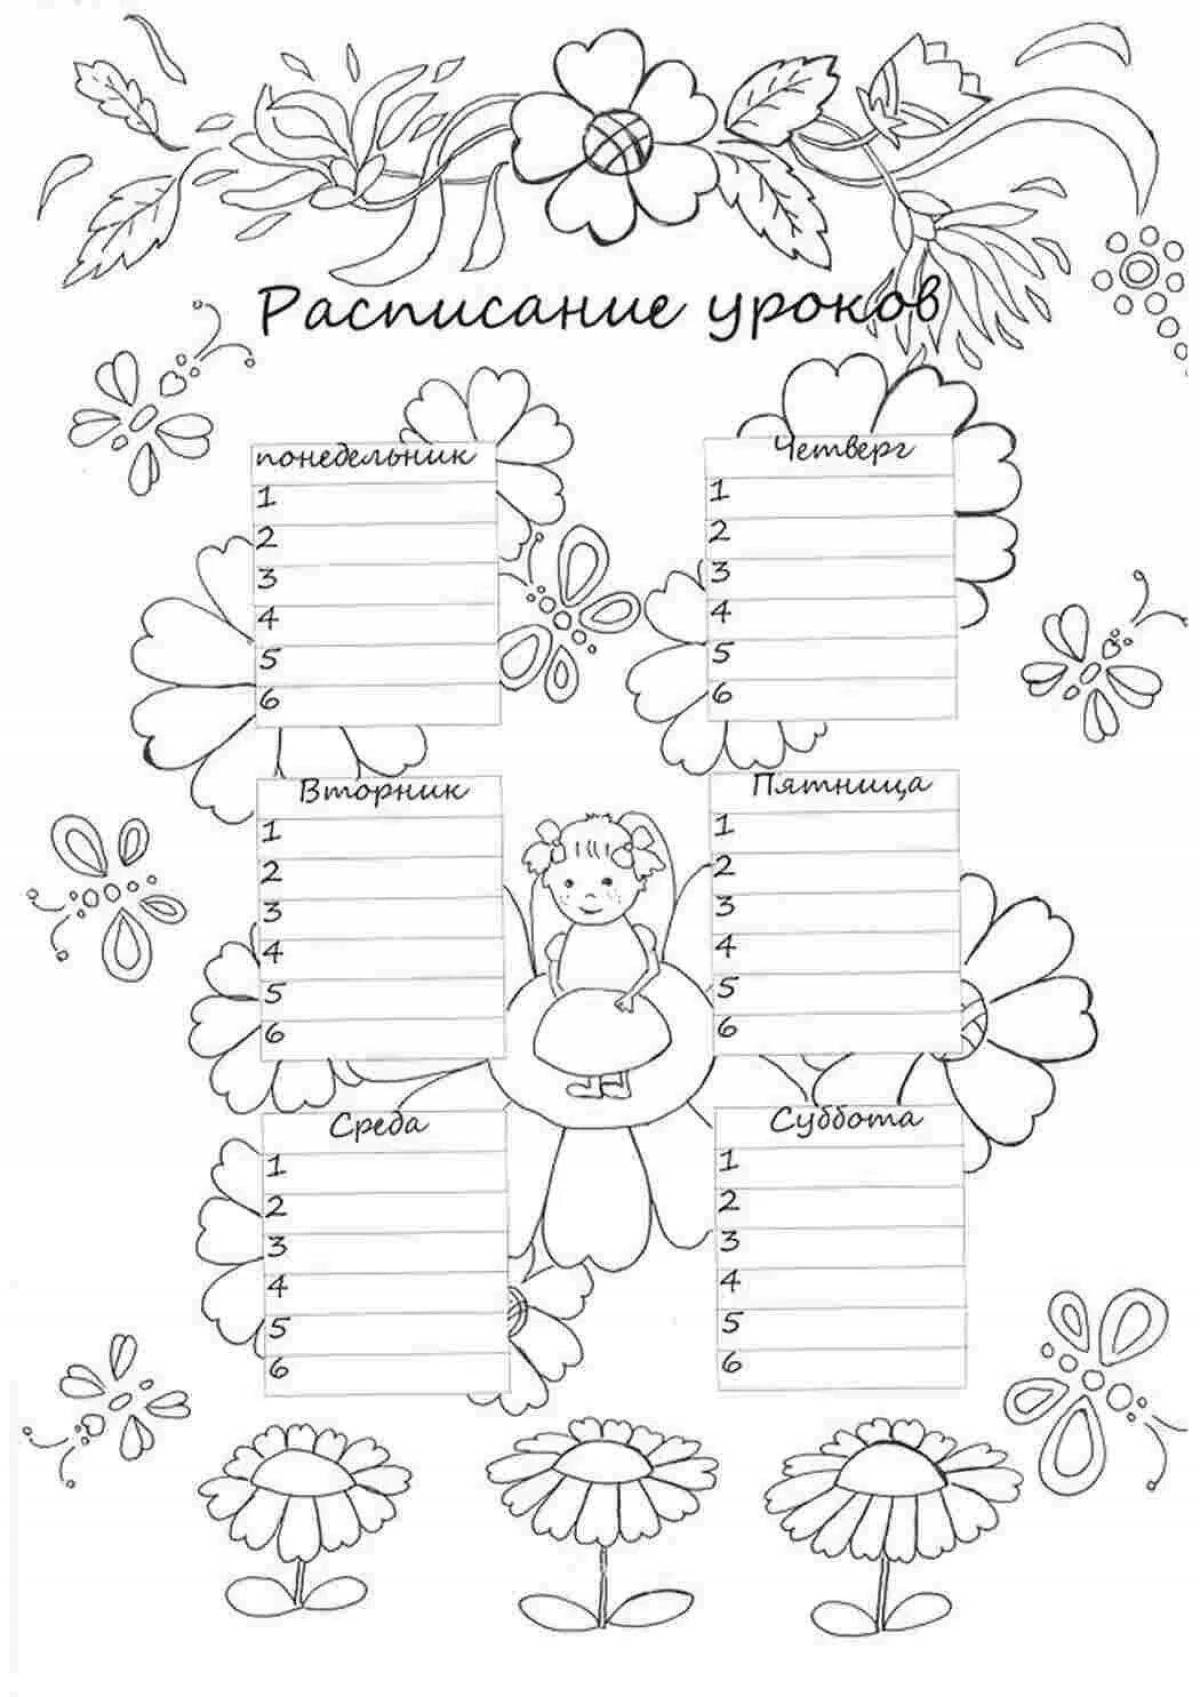 Adorable coloring schedule for girls